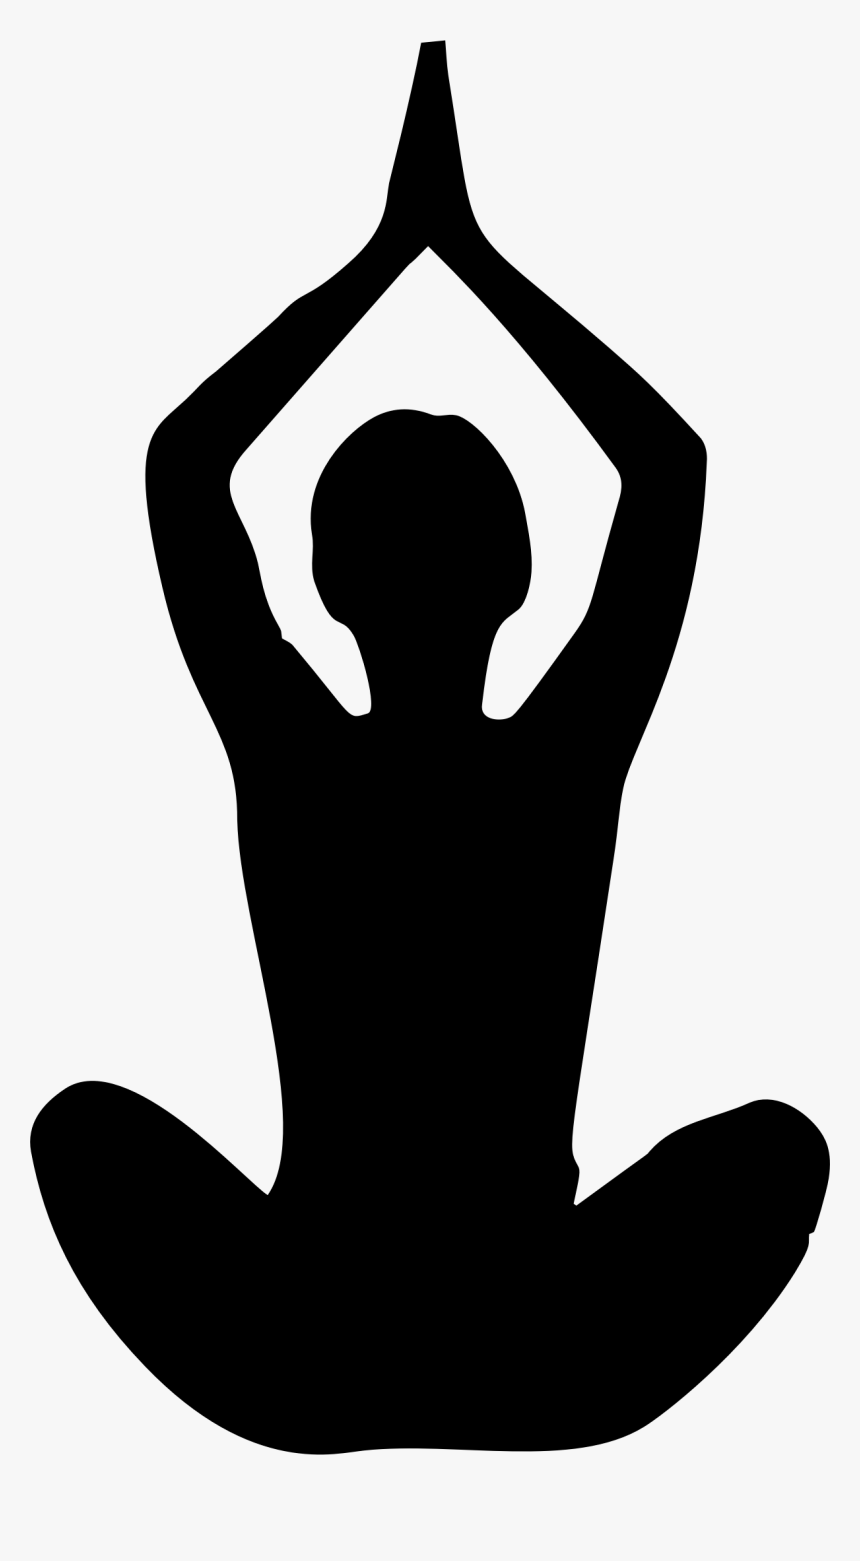 File:Silhouette yoga.png - Wikimedia Commons